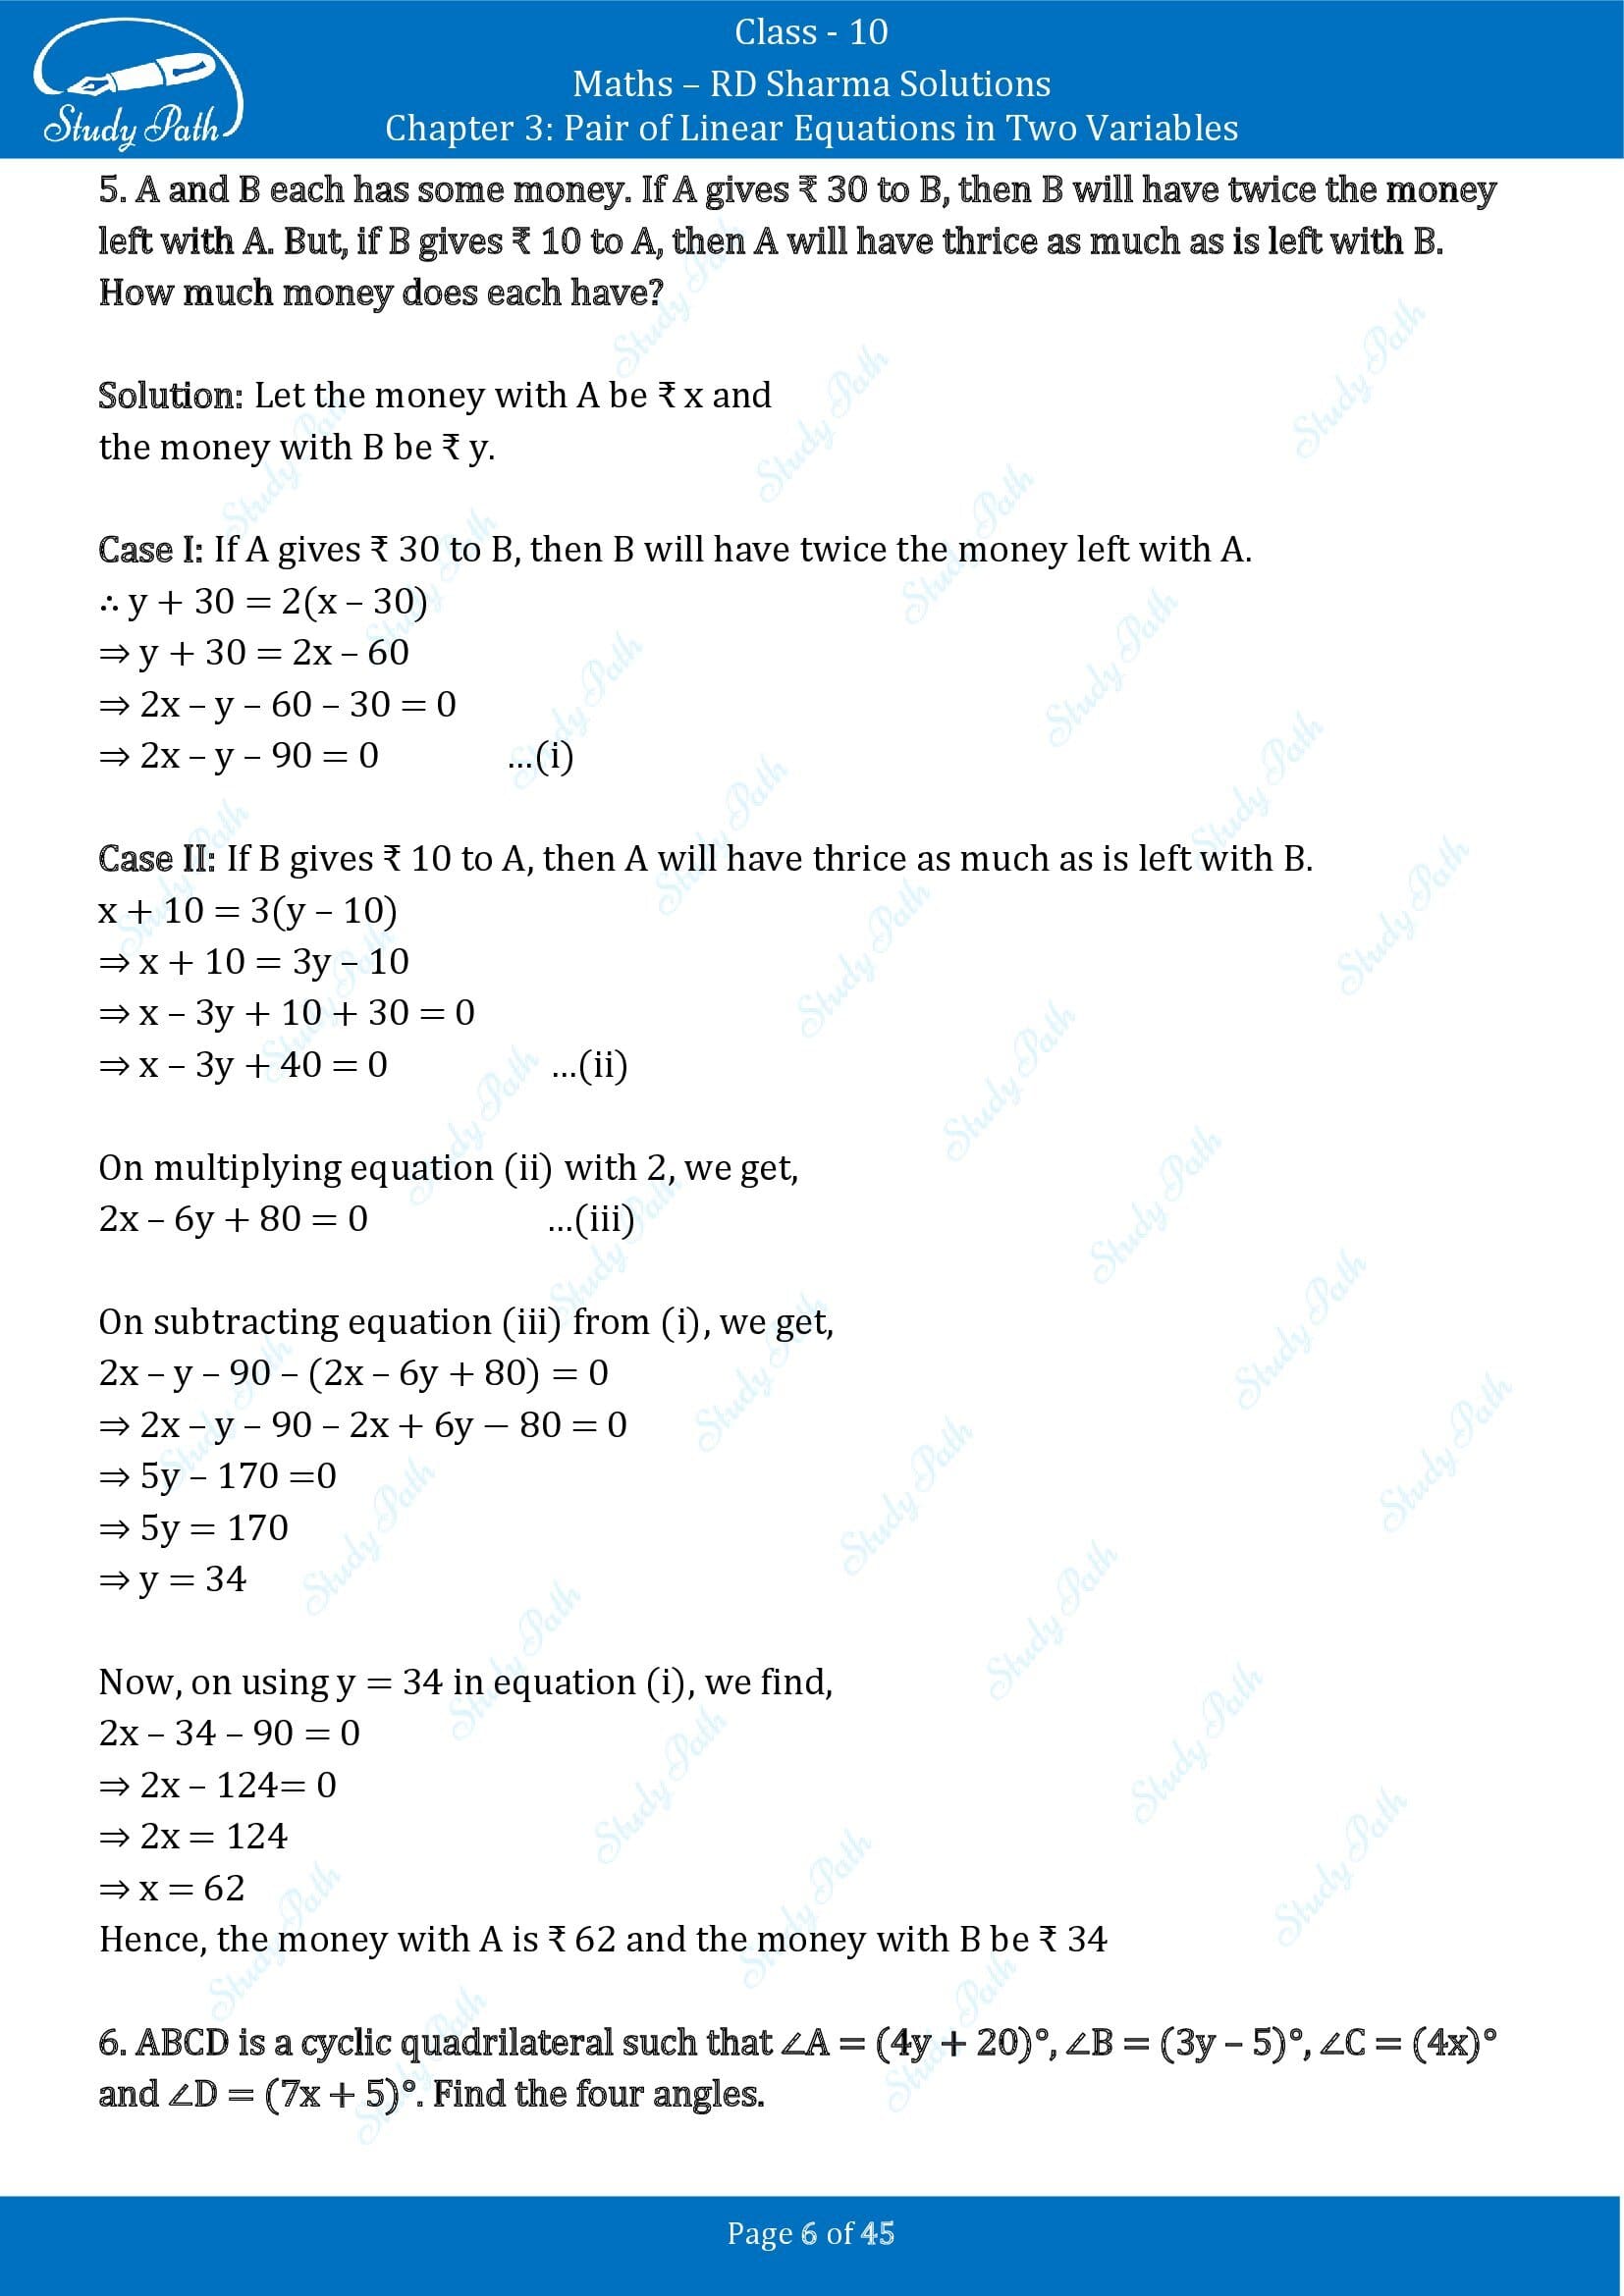 RD Sharma Solutions Class 10 Chapter 3 Pair of Linear Equations in Two Variables Exercise 3.11 00006